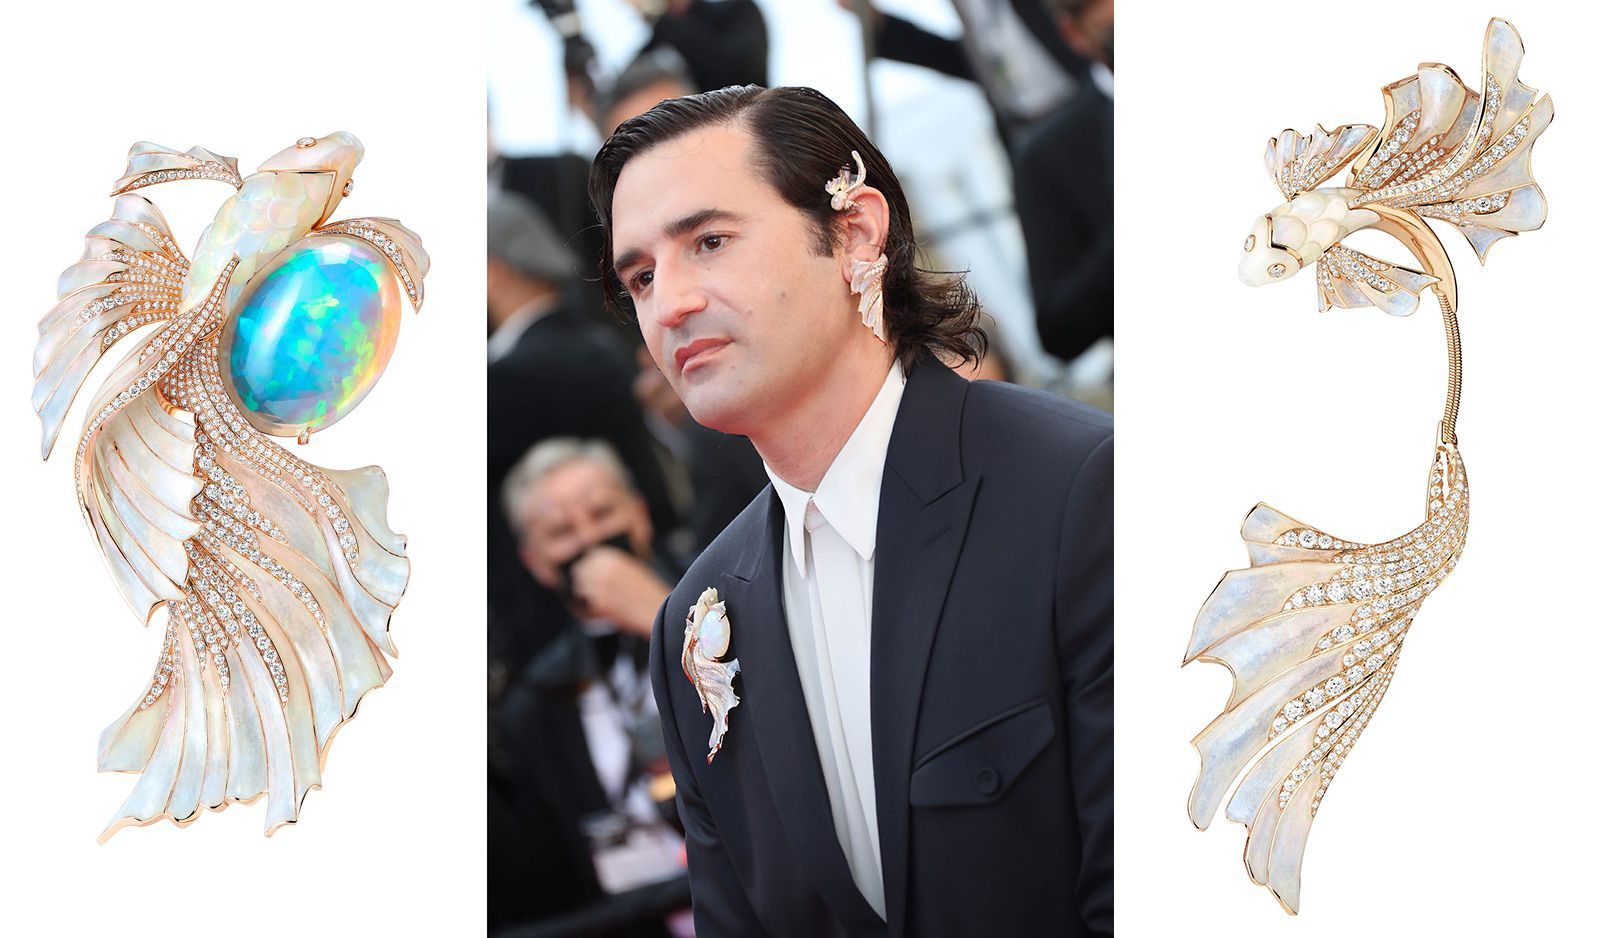 French actor Nicolas Maury wears the Opalescence brooch, set with a 71.69 carat oval cabochon, and the Opalescence pendant earring set with opals and diamonds from the Boucheron Holographique High Jewellery collection